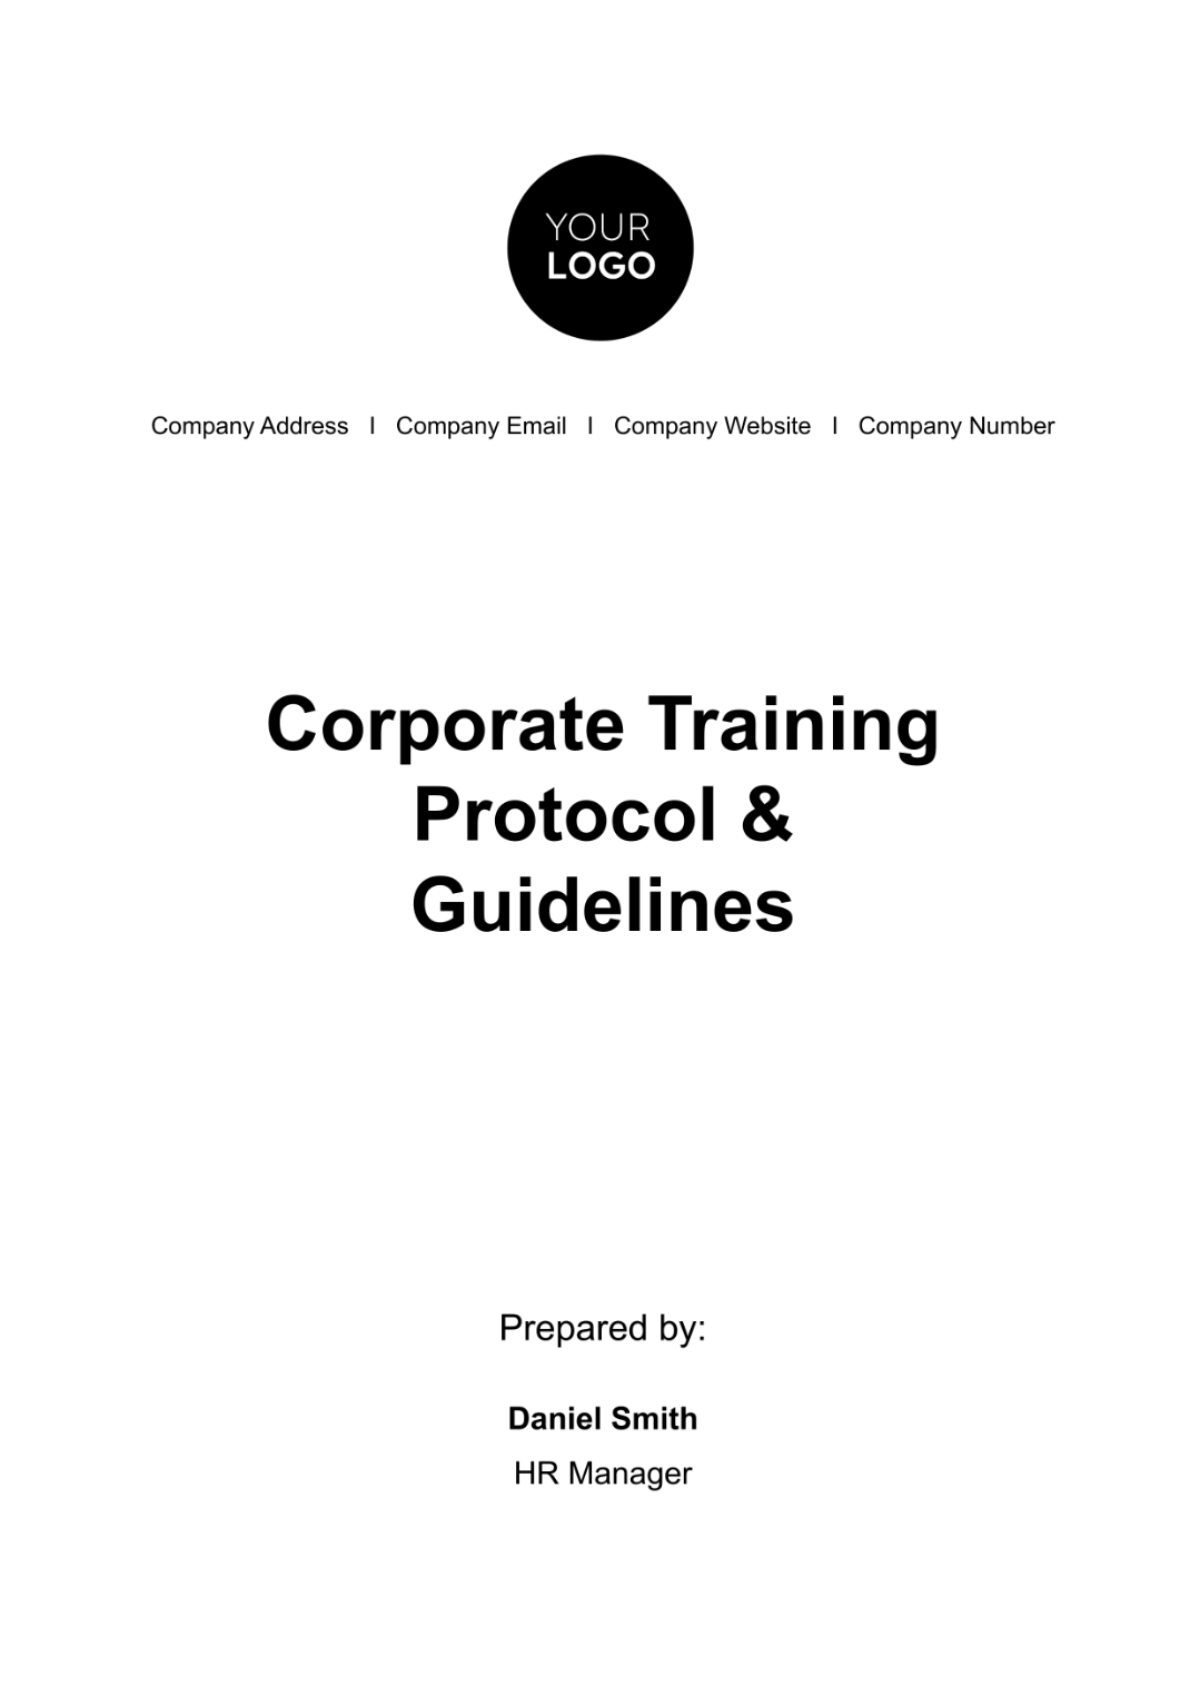 Corporate Training Protocol & Guidelines HR Template